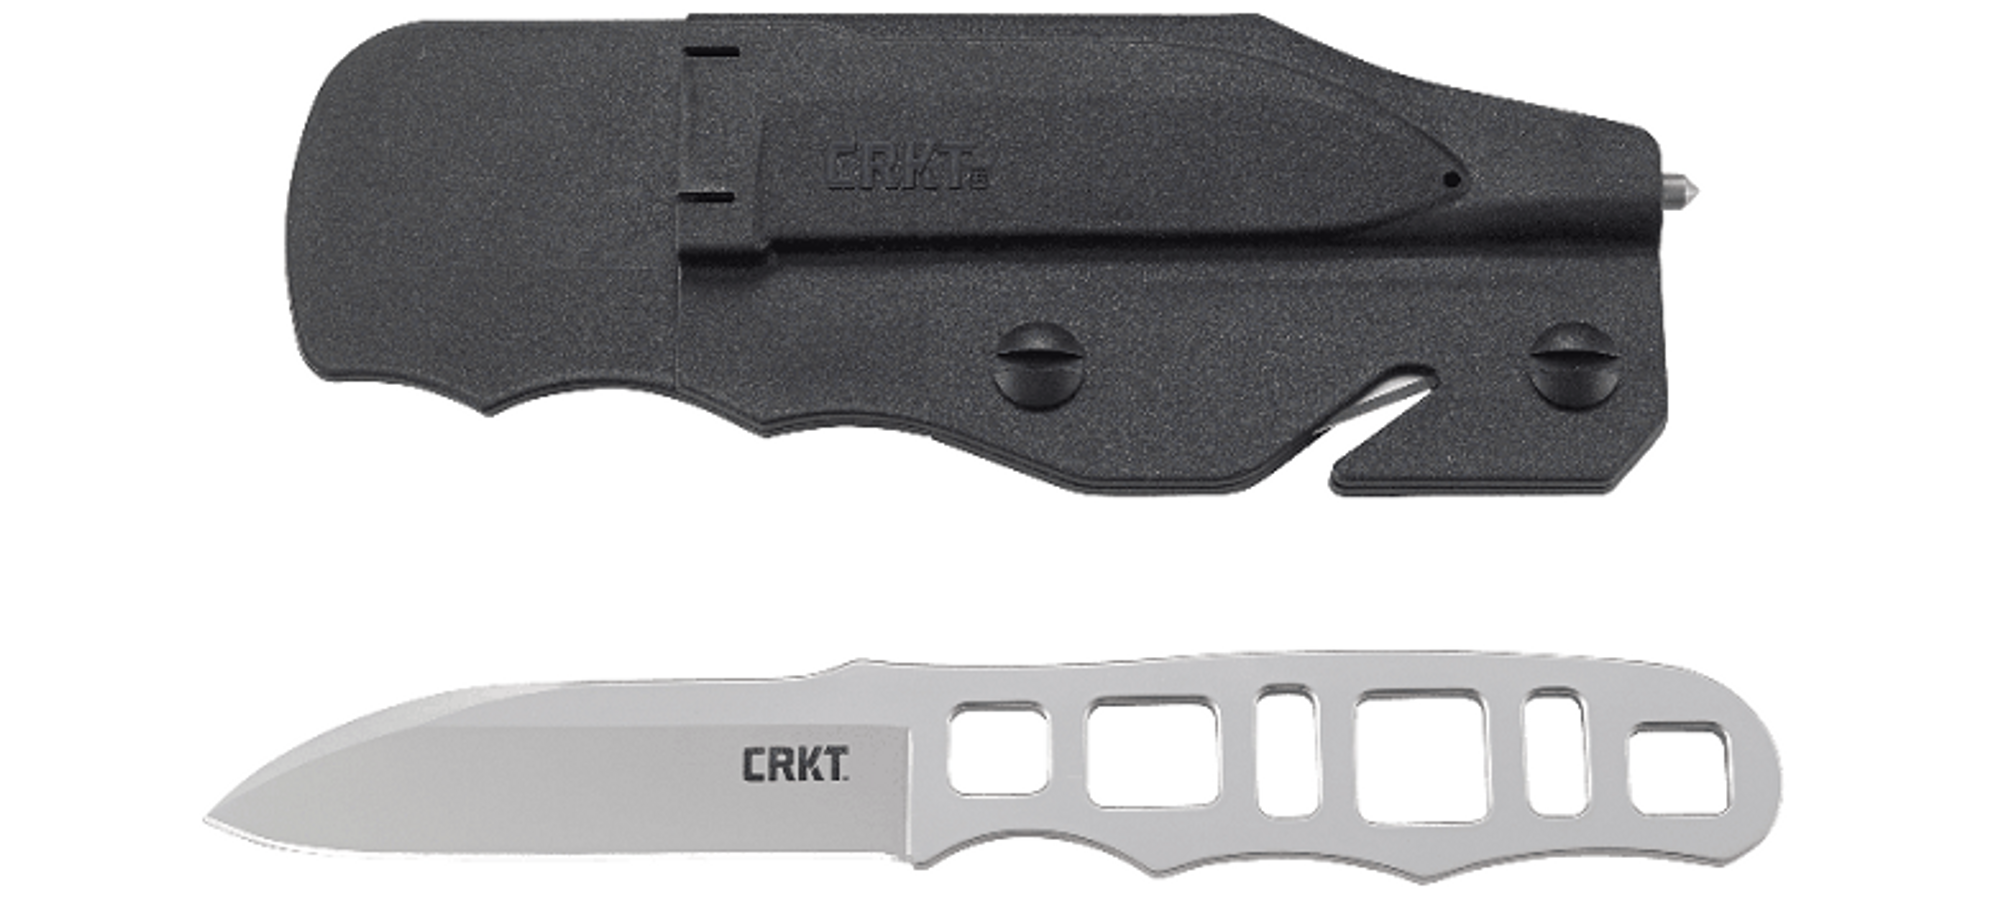 CRKT 2065 Highway Rescue Knife by Bob Terzuola